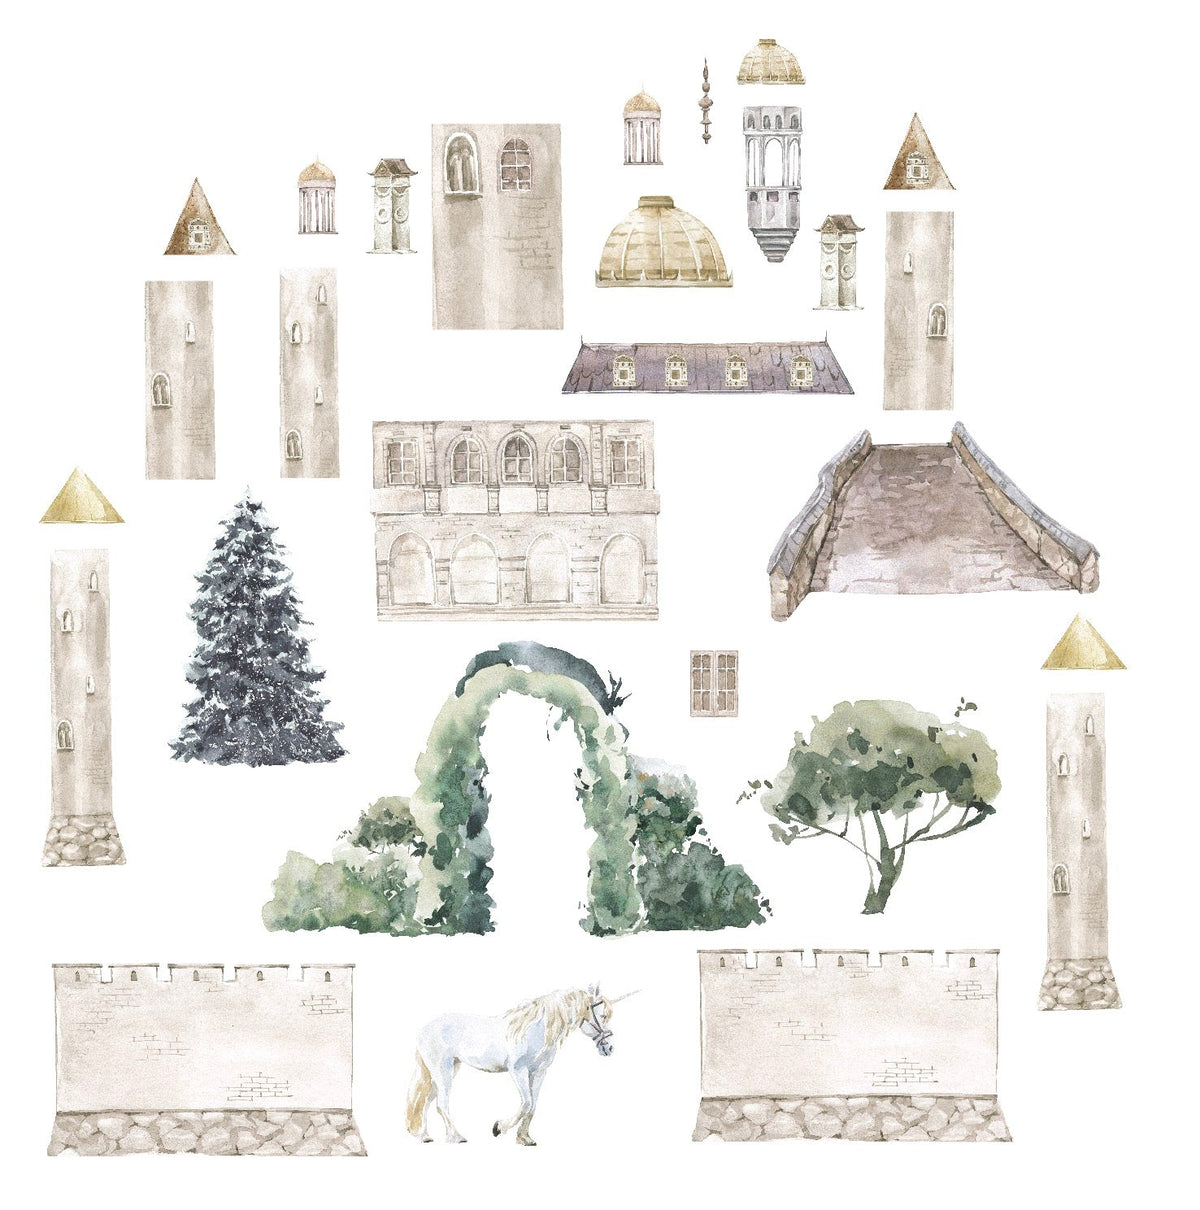 A collection of watercolor illustrations featuring various architectural elements, trees, a white horse, and Fairytale Castle Decals, all depicted in a muted color palette by Cover-Alls.